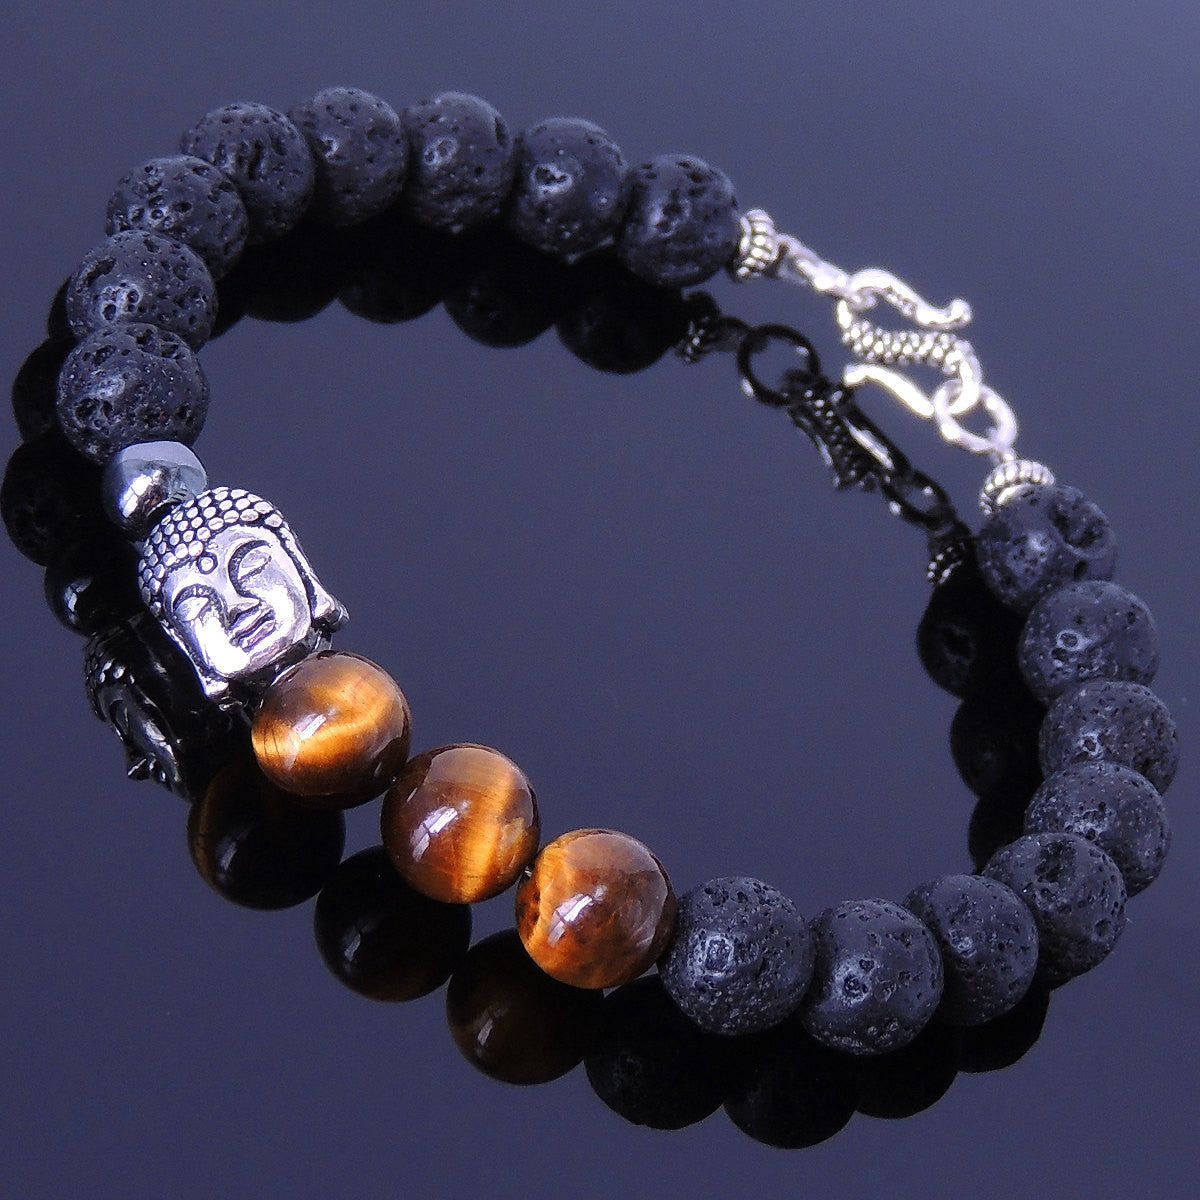 Lava Rock, Hematite, & Brown Tiger Eye Healing Gemstone Bracelet with S925 Sterling Silver Guanyin Protection Buddha Bead & S-Hook Clasp - Handmade by Gem & Silver BR322